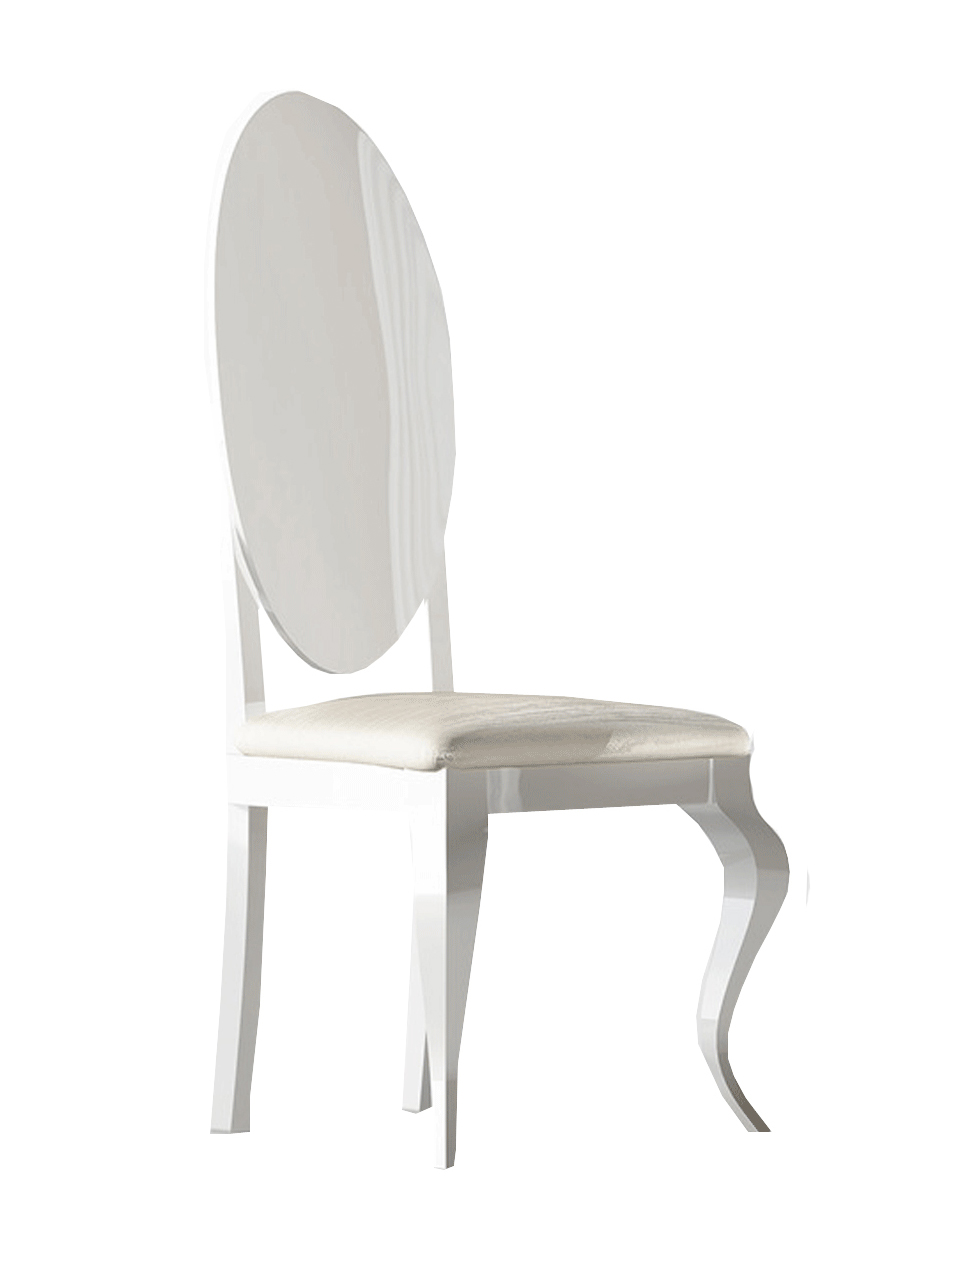 Dining Room Furniture Chairs Carmen Arm and side White chair